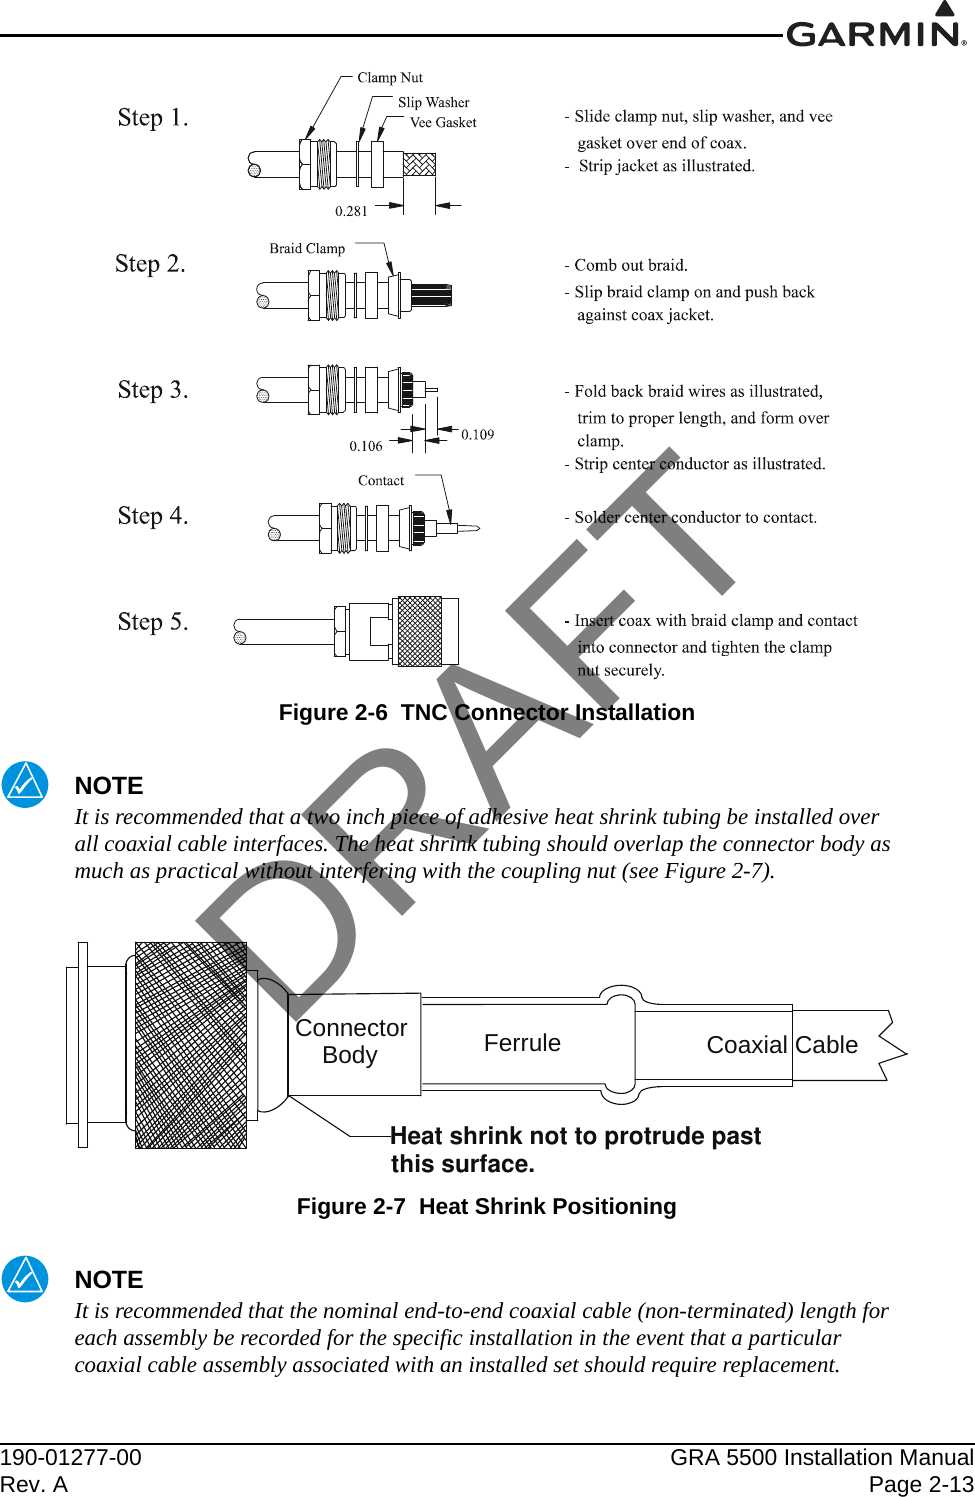 190-01277-00 GRA 5500 Installation ManualRev. A Page 2-13Figure 2-6  TNC Connector InstallationNOTEIt is recommended that a two inch piece of adhesive heat shrink tubing be installed over all coaxial cable interfaces. The heat shrink tubing should overlap the connector body as much as practical without interfering with the coupling nut (see Figure 2-7).Figure 2-7  Heat Shrink PositioningNOTEIt is recommended that the nominal end-to-end coaxial cable (non-terminated) length for each assembly be recorded for the specific installation in the event that a particular coaxial cable assembly associated with an installed set should require replacement.ConnectorBody Ferrule Coaxial CableHeat shrink not to protrude past this surface.DRAFT